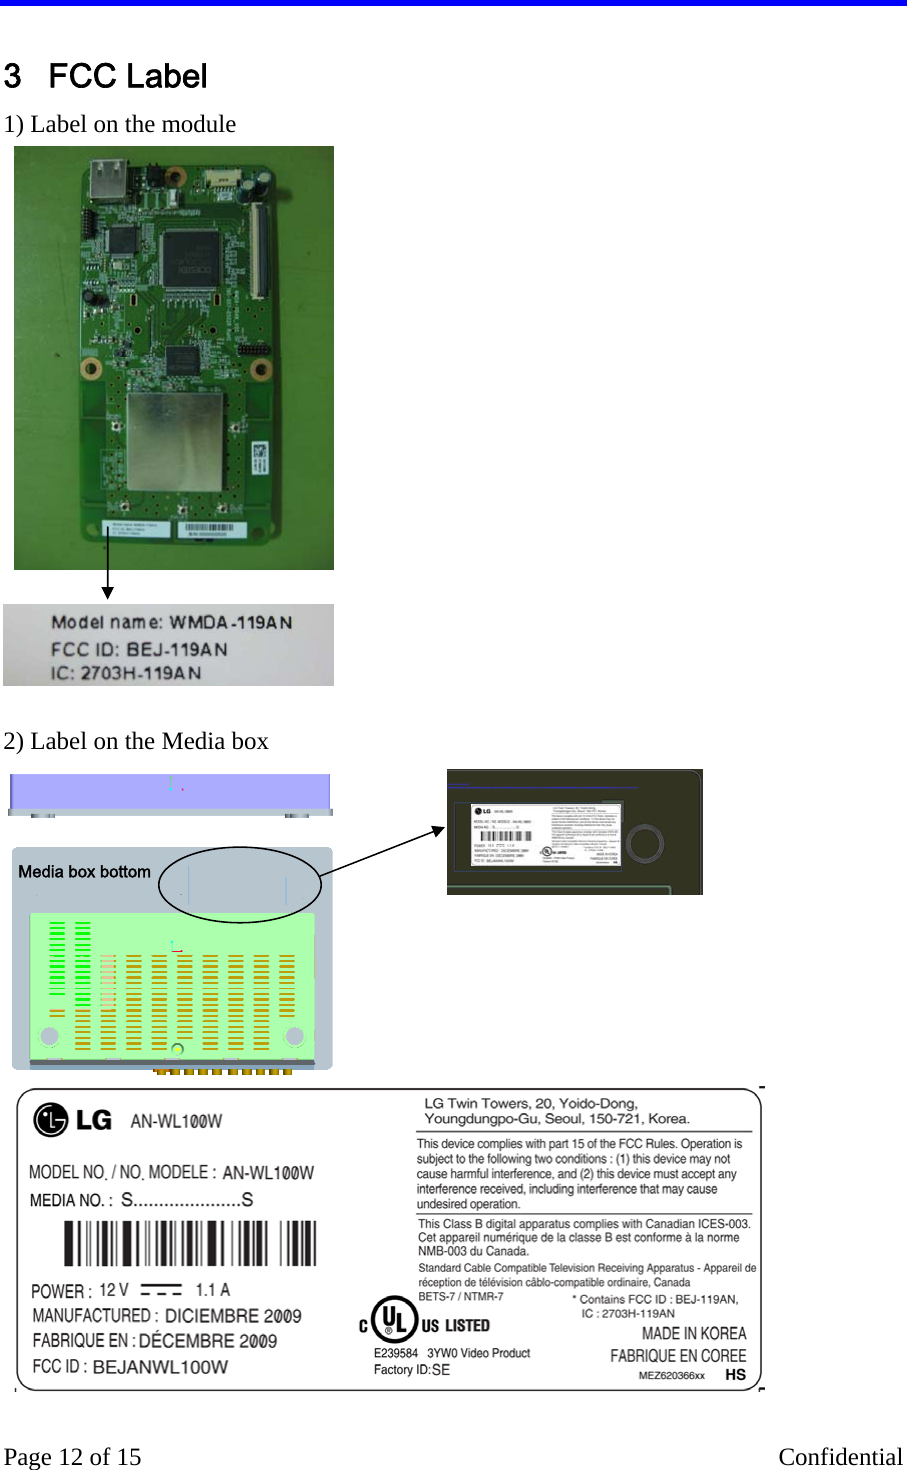    Page 12 of 15    Confidential 3 FCC Label  1) Label on the module              2) Label on the Media box                Media box bottom 